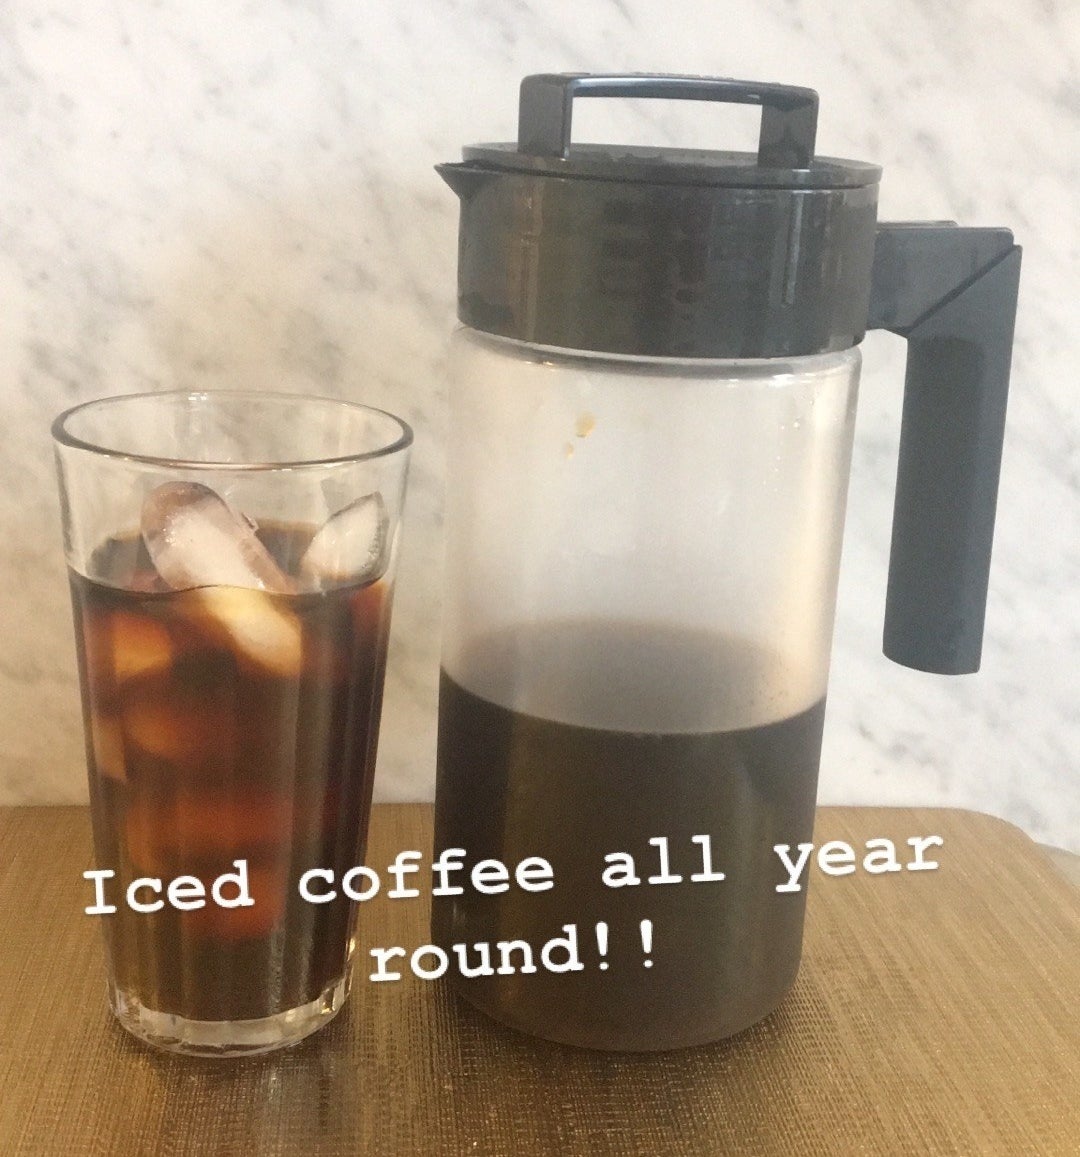 BuzzFeed Shopping reviewer&#x27;s picture of the cold brew maker with caption &quot;iced coffee all year round!&quot;